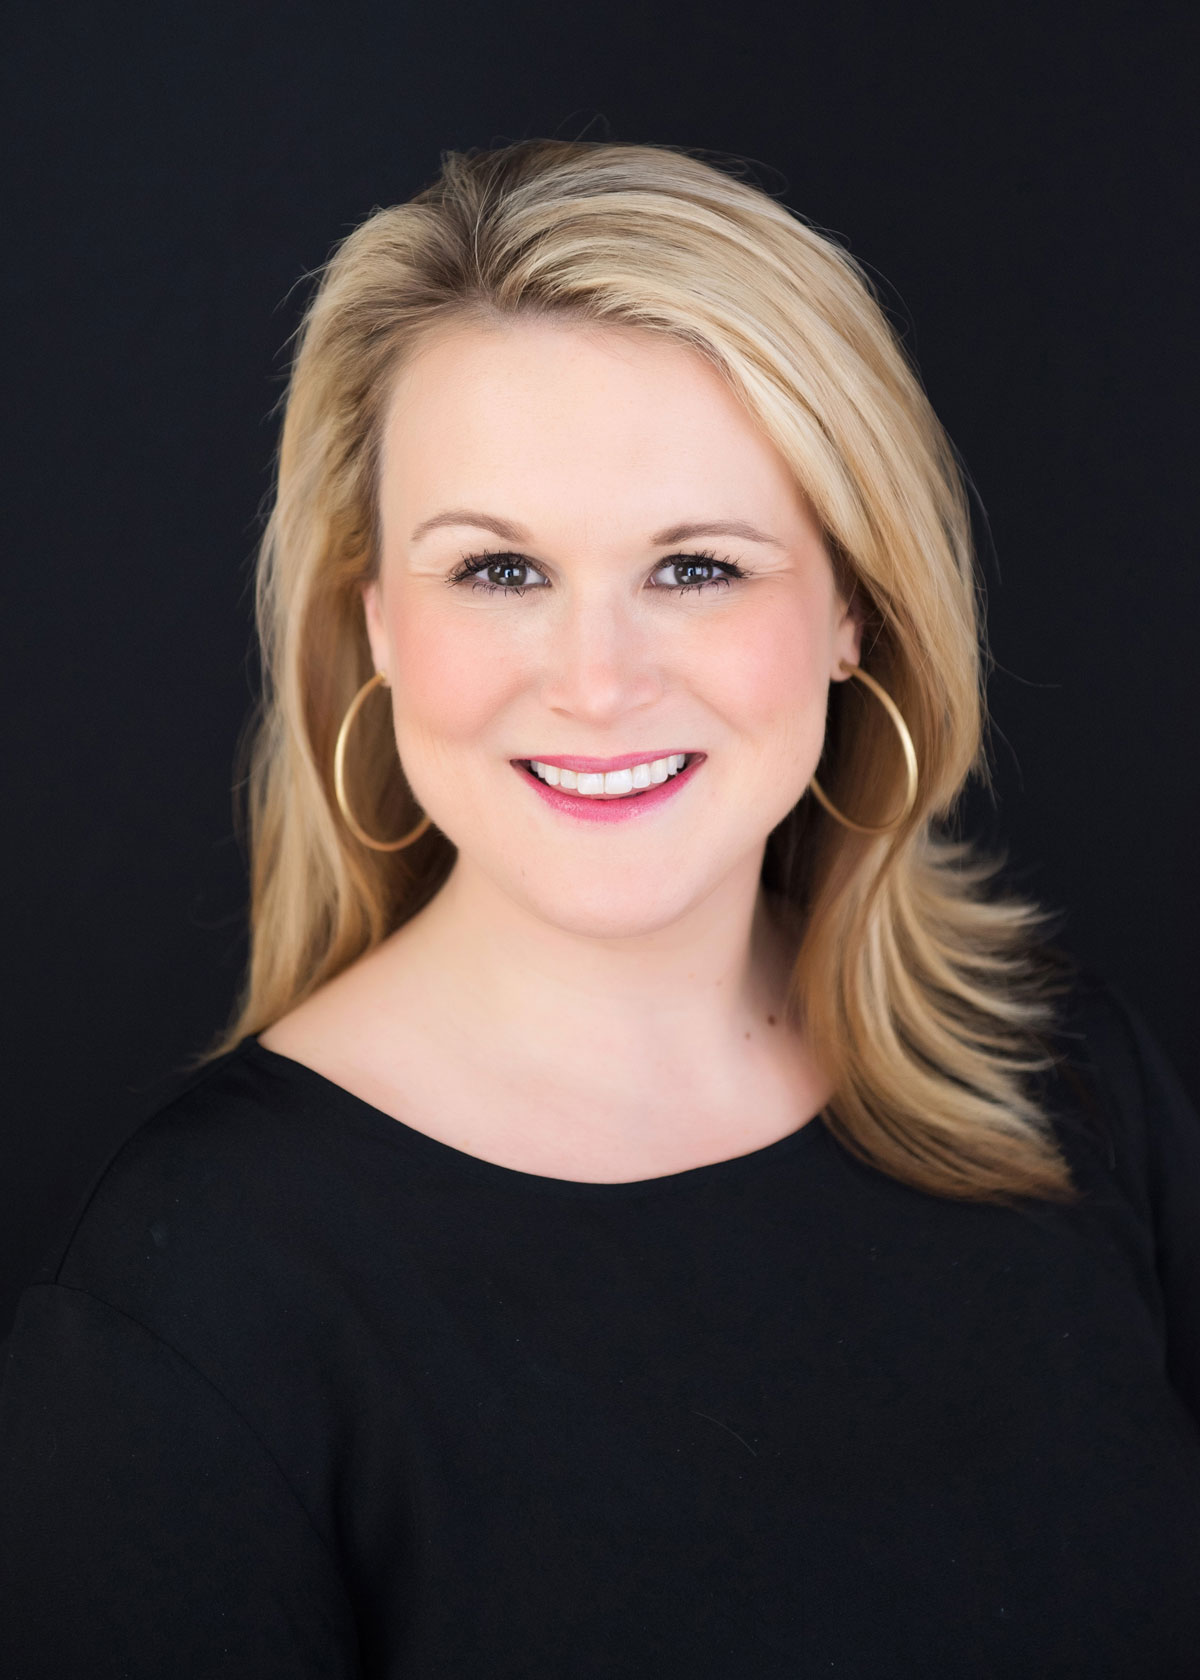 A headshot of a blonde woman smiling in Wake County